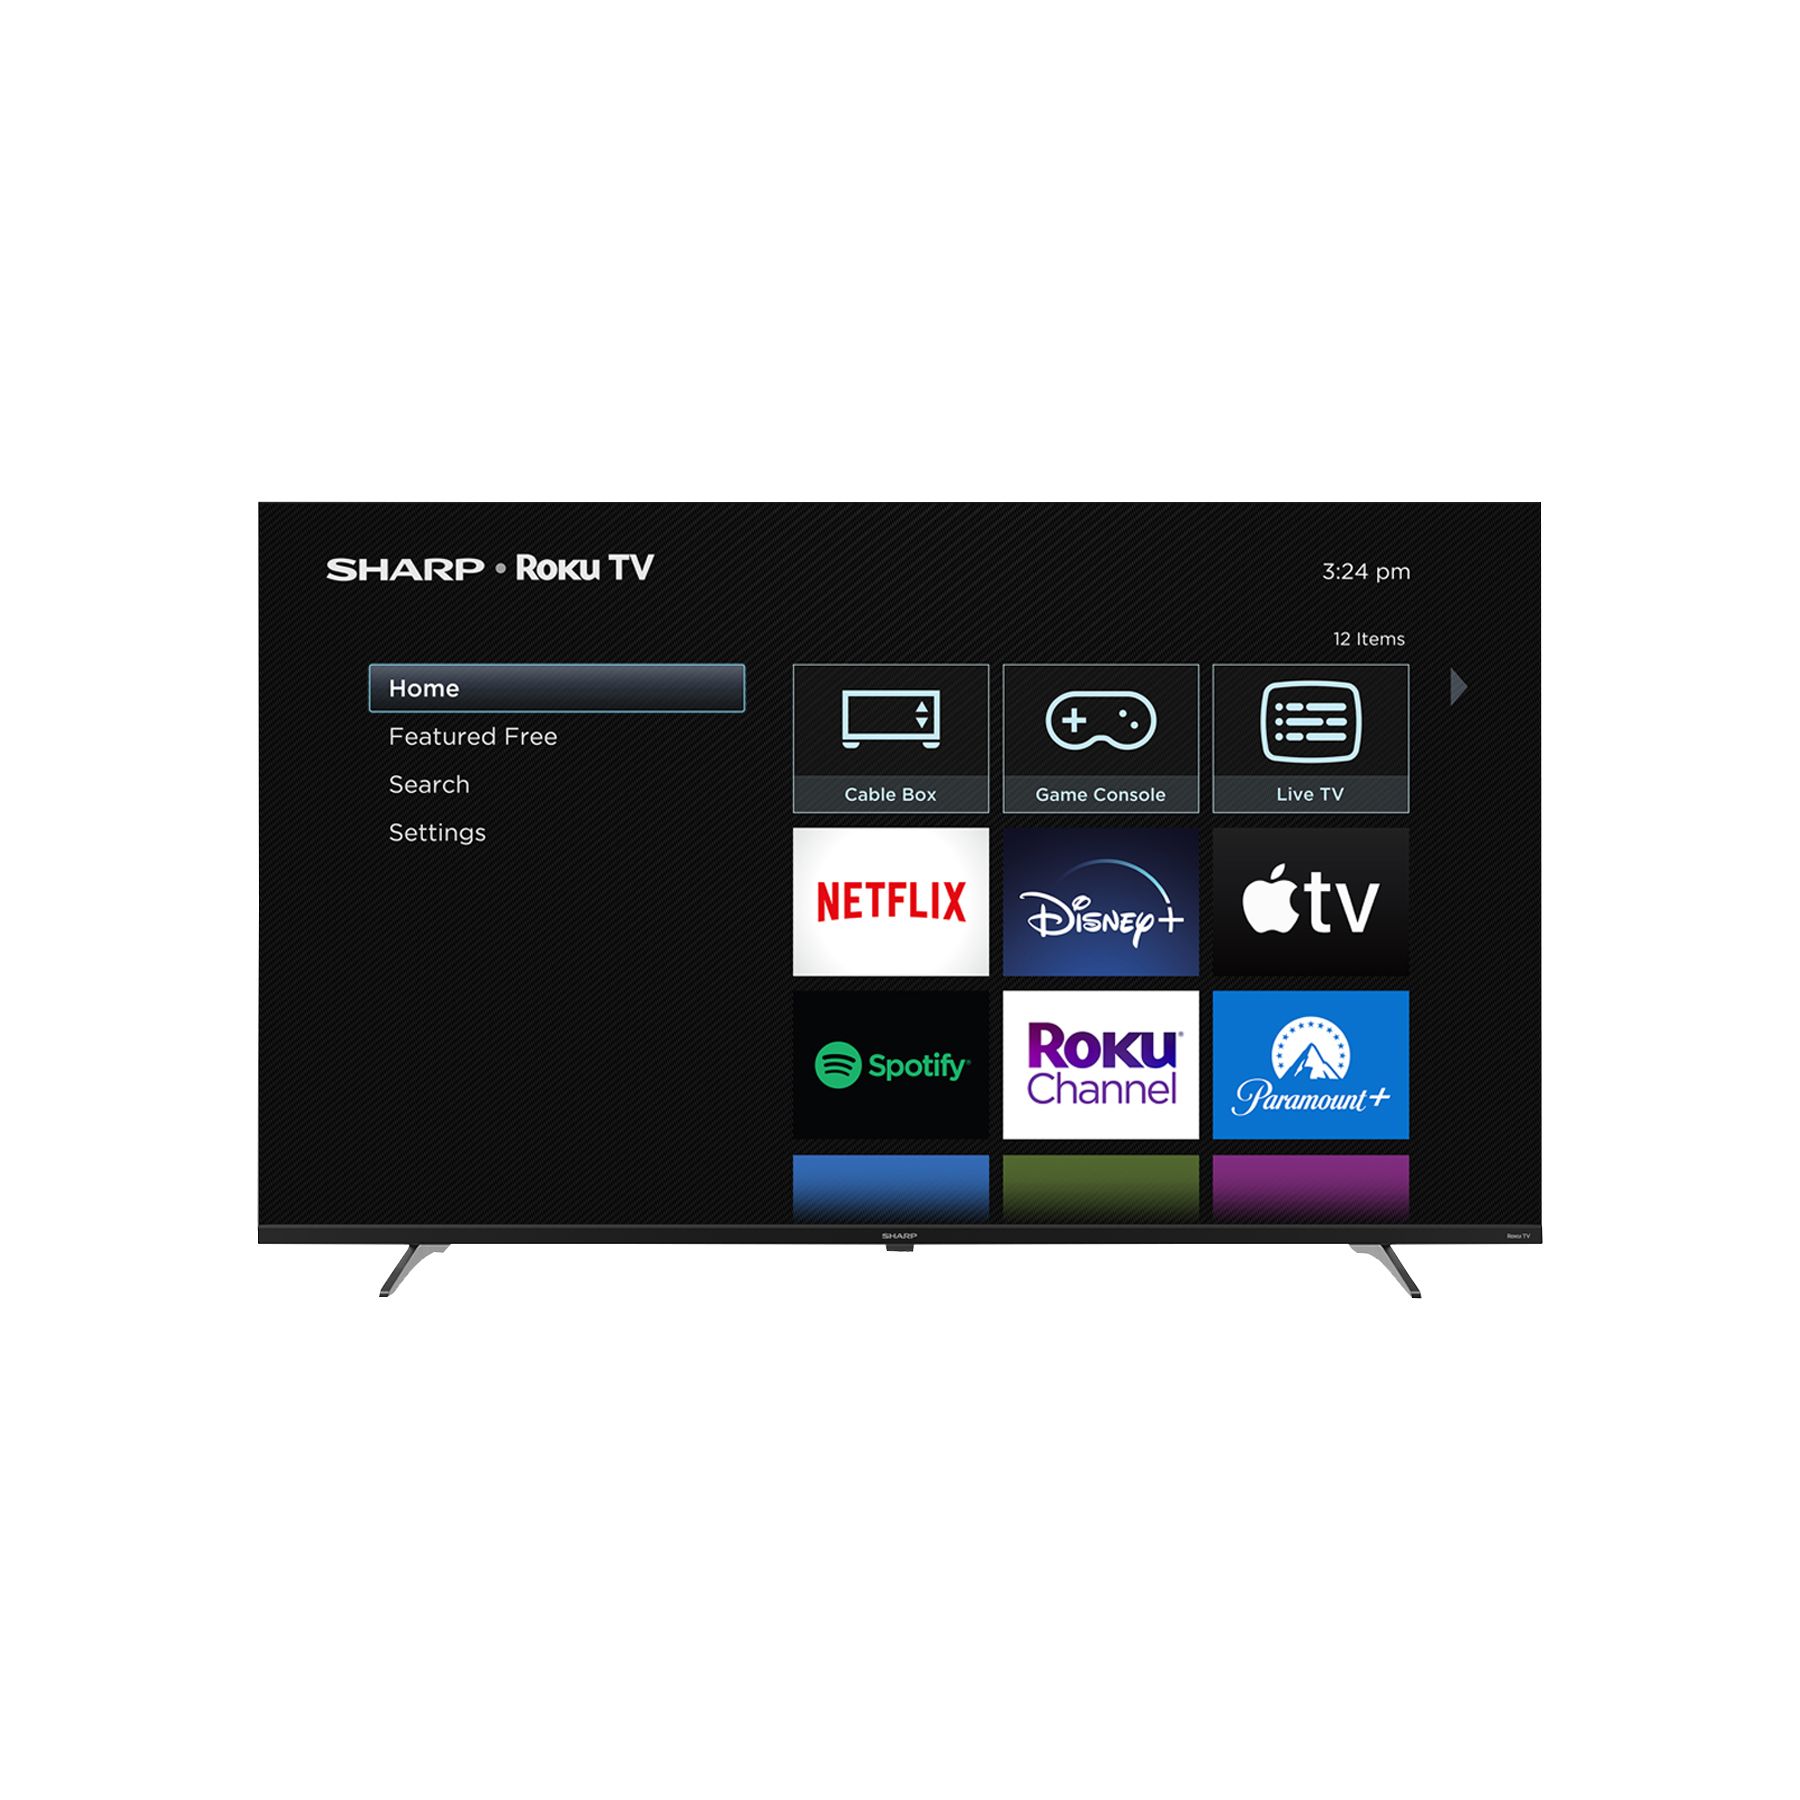 Roku TV, the easy to use Smart TV